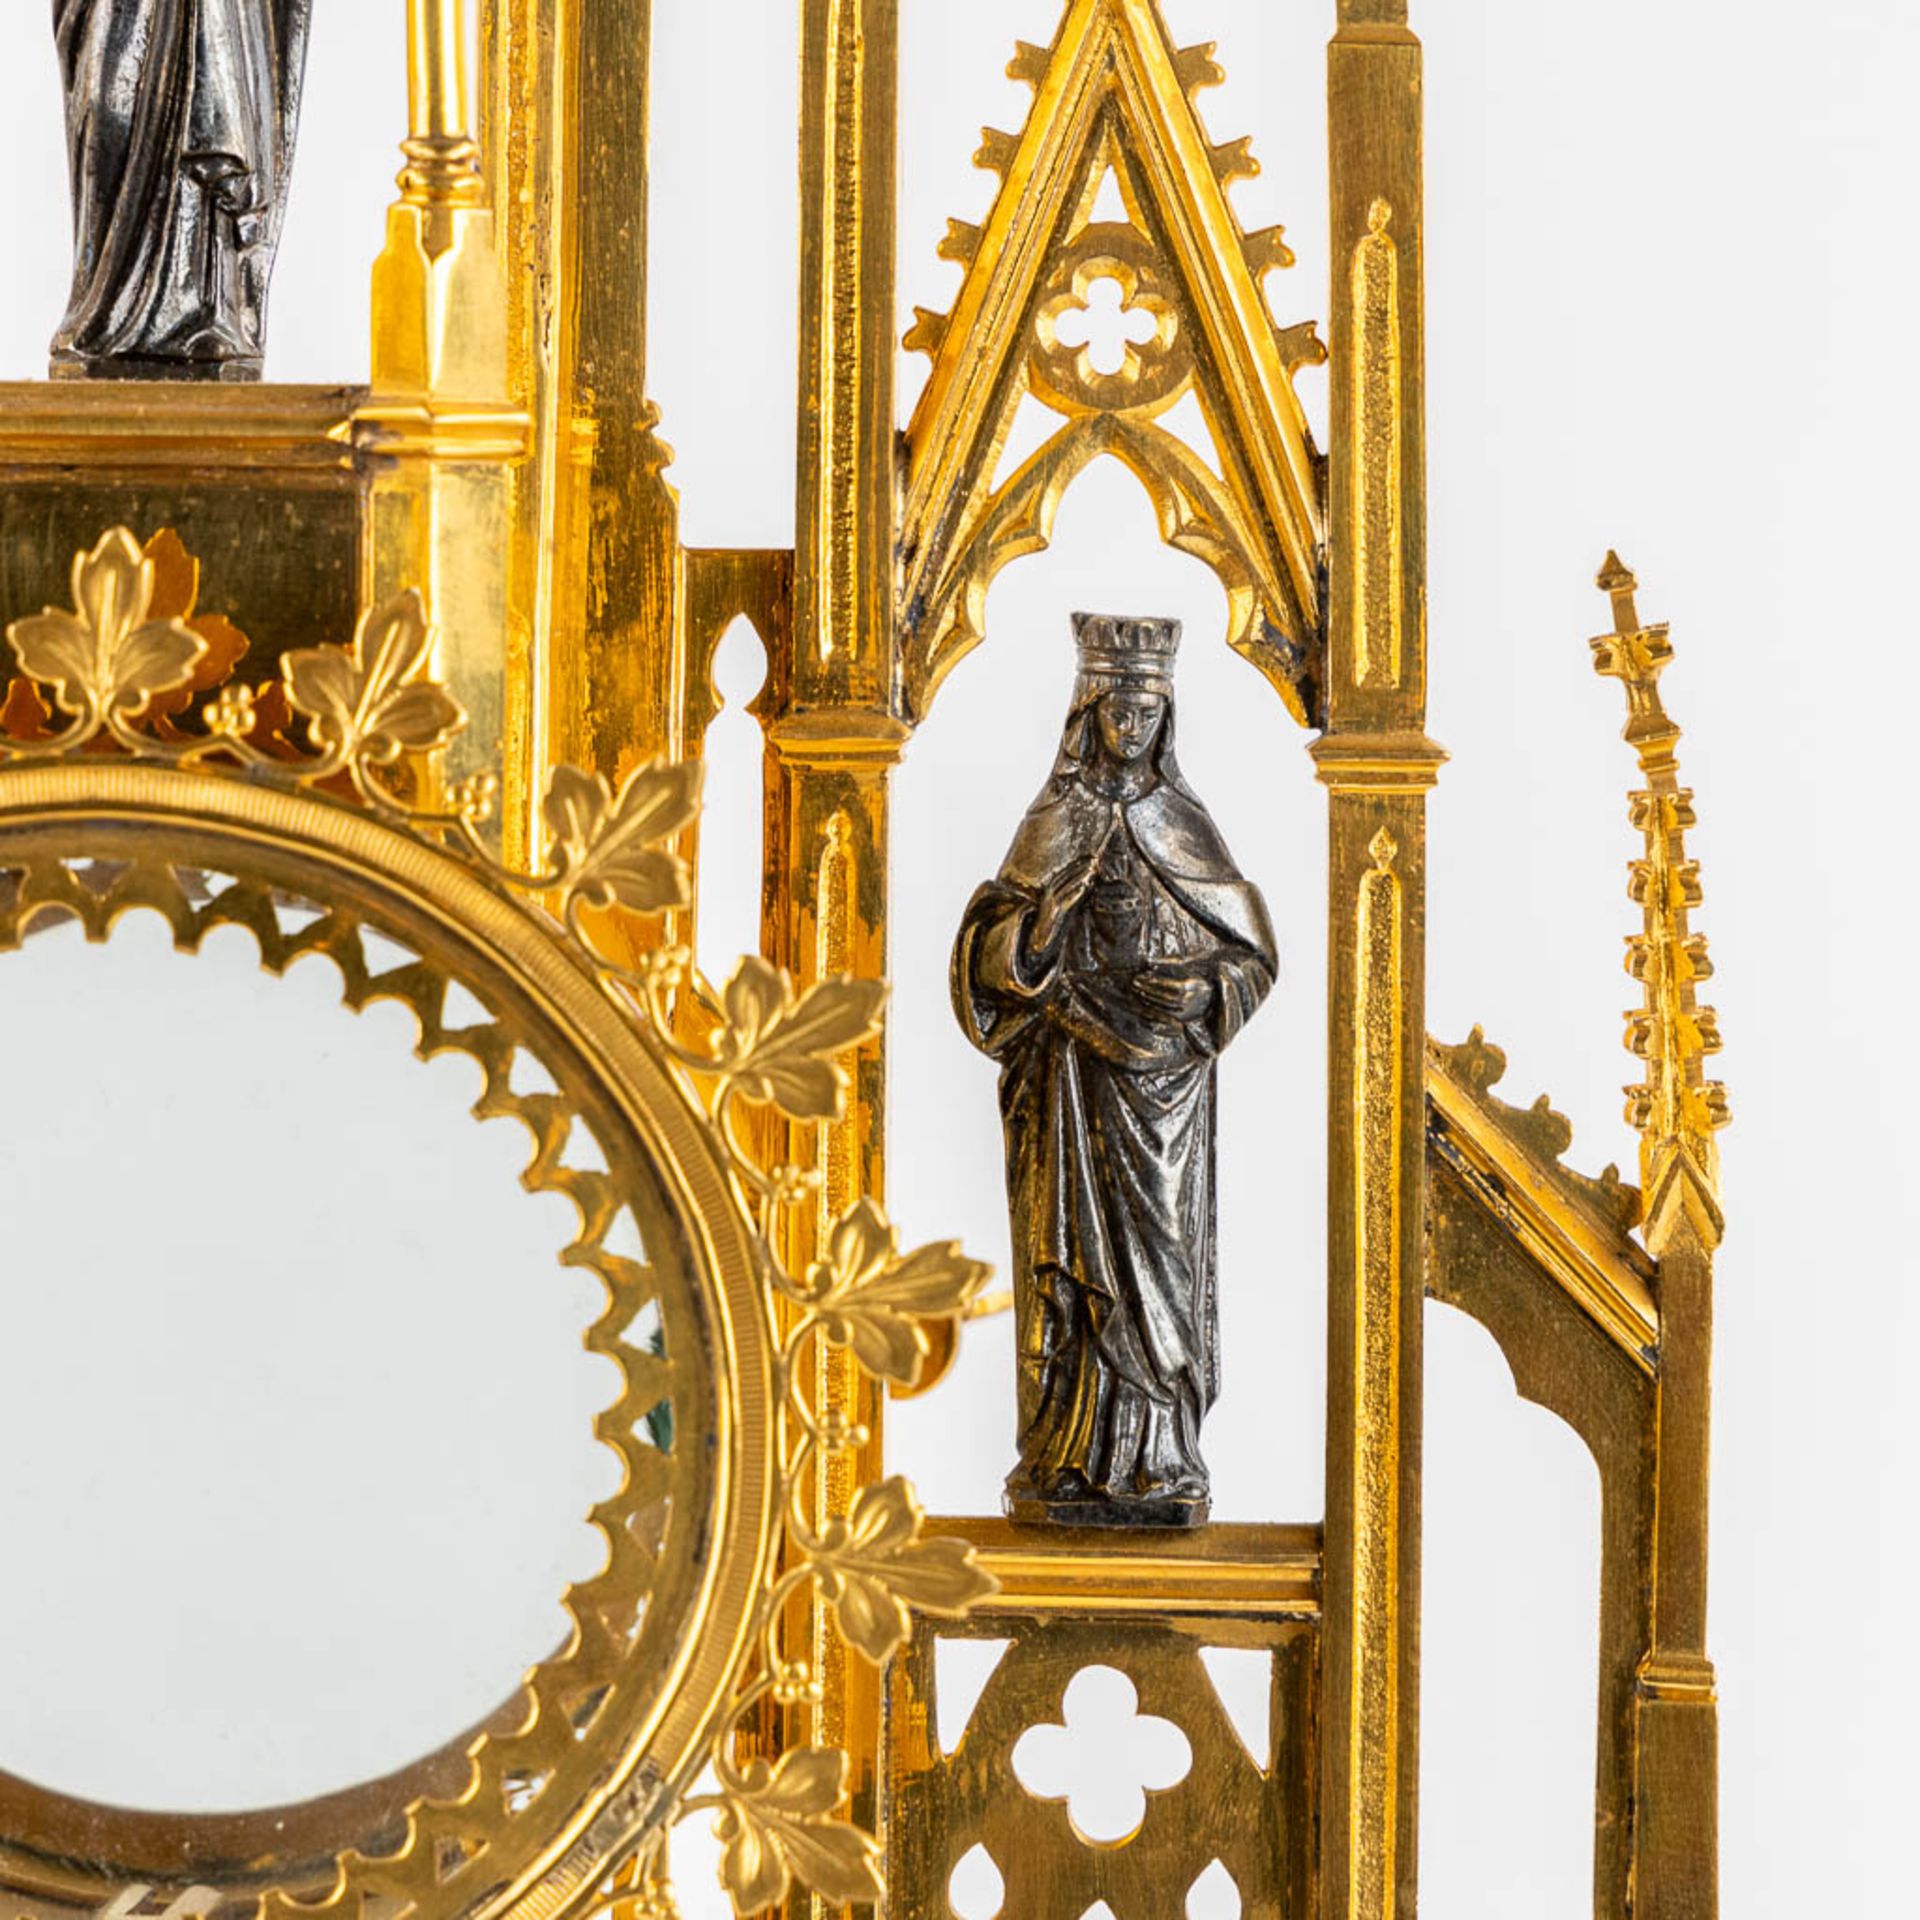 A Tower monstrance, gilt and silver plated brass, Gothic Revival. 19th C. (W:21,5 x H:58 cm) - Image 15 of 22